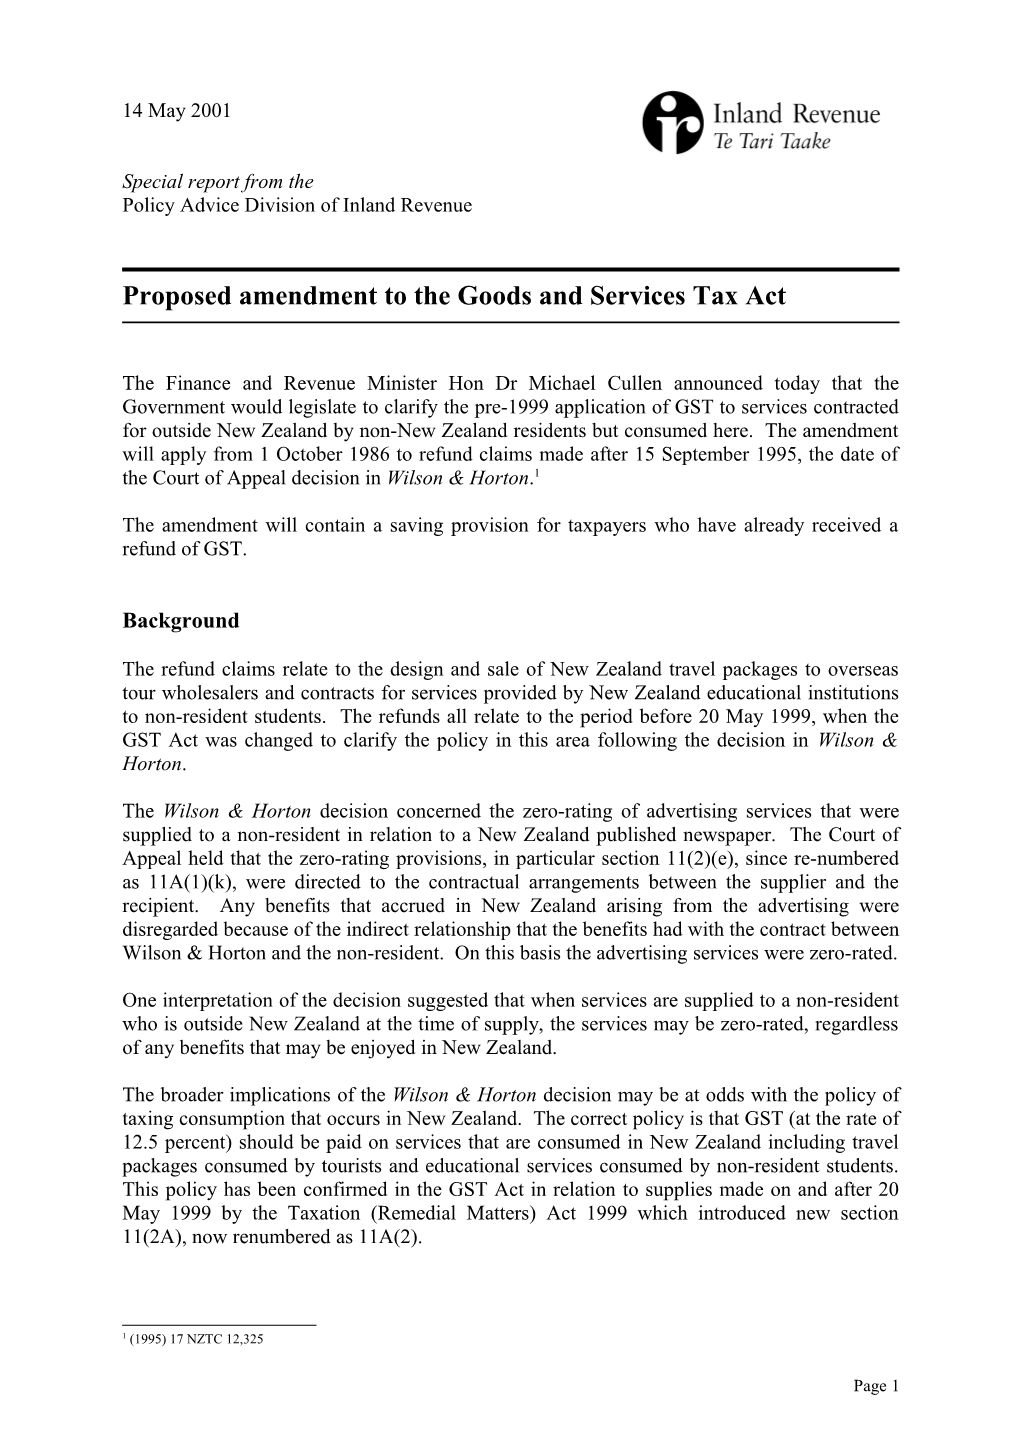 Special Report - Proposed Amendment to the Goods and Services Tax Act